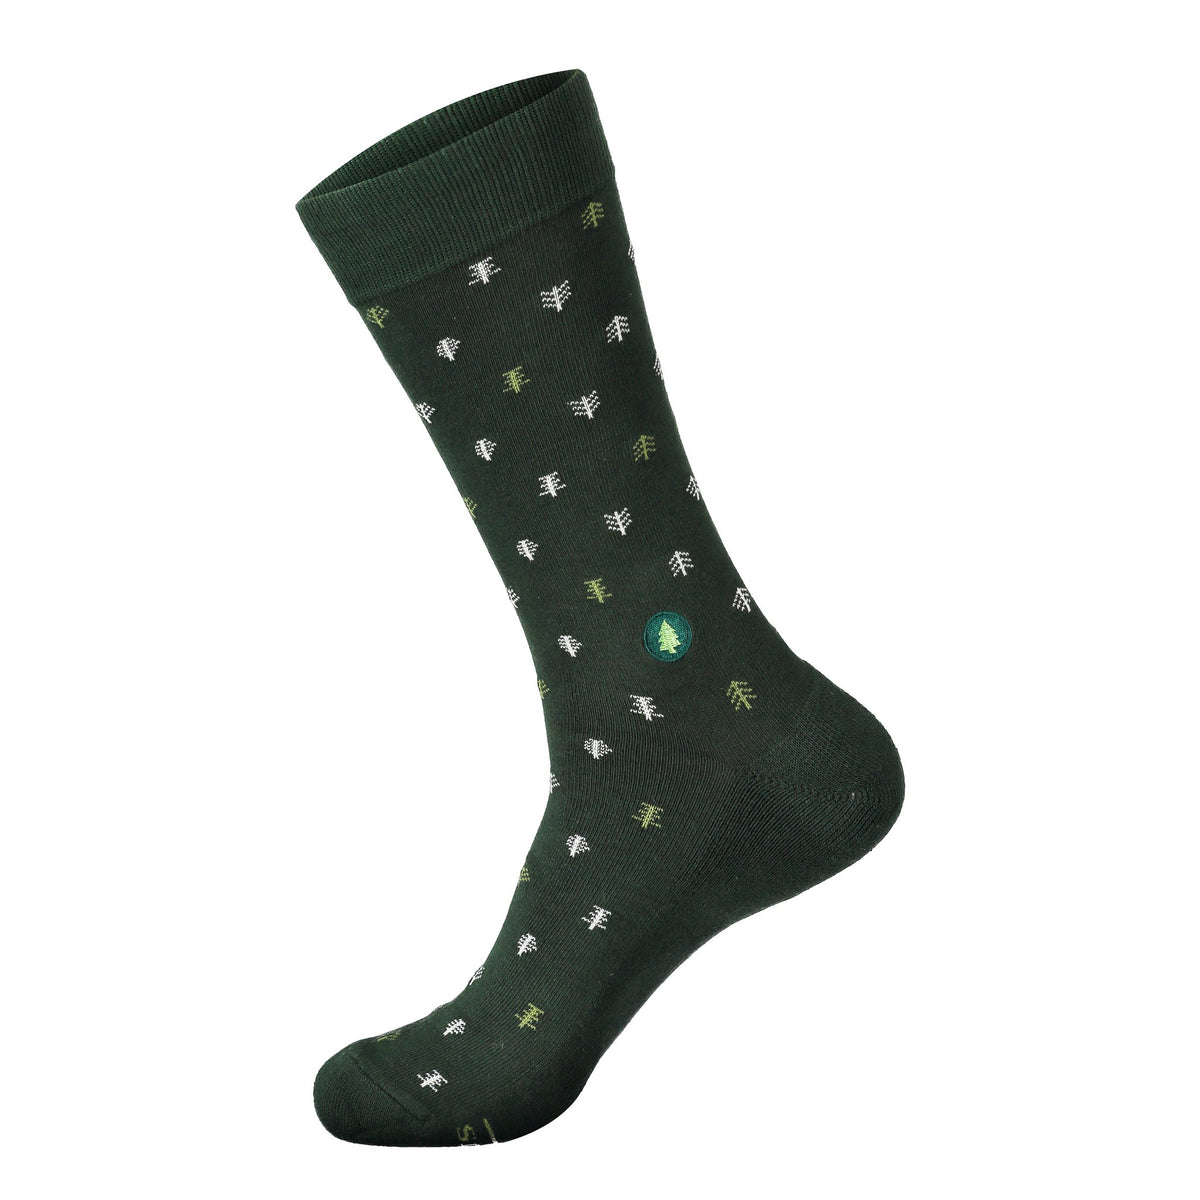 Socks that Plant Trees - All Over Print